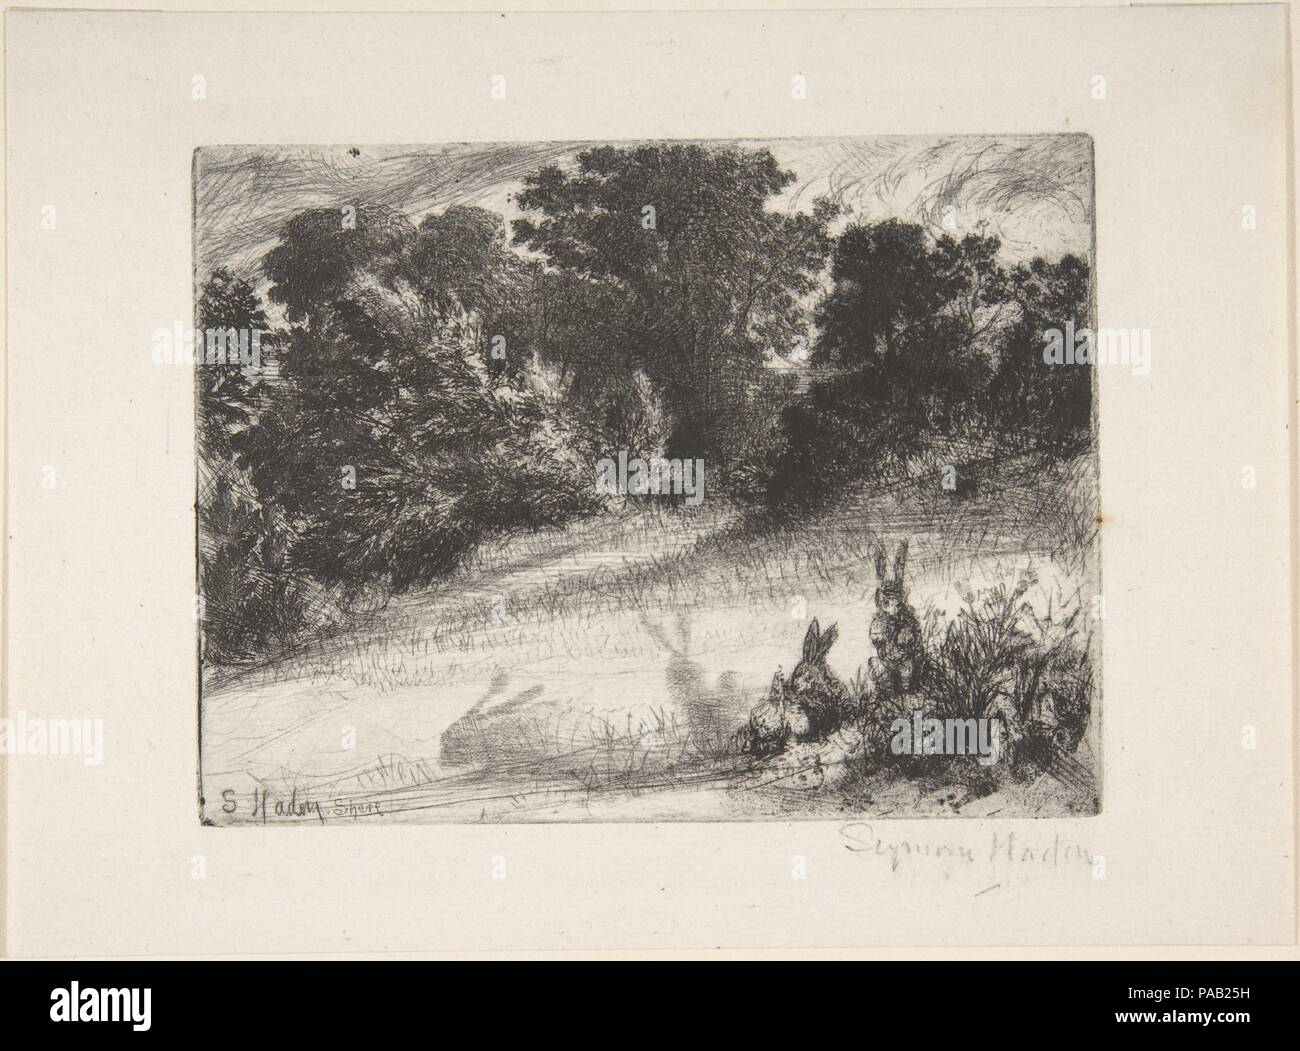 Combe Bottom. Artist: Sir Francis Seymour Haden (British, London 1818-1910 Bramdean, Hampshire). Dimensions: Sheet: 6 3/16 x 8 3/8 in. (15.7 x 21.3 cm)  Plate: 4 1/2 x 5 7/8 in. (11.4 x 15 cm). Date: 1860.  Seymour Haden was the unlikely combination of a surgeon and an etcher. Although he pursued a very successful medical career, he is mostly remembered for his etched work as well as for his writings on etching. He was one of a group of artists, including James McNeill Whistler (1834-1903) and Alphonse Legros (1837-1911), whose passionate interest in the medium led to the so-called etching rev Stock Photo